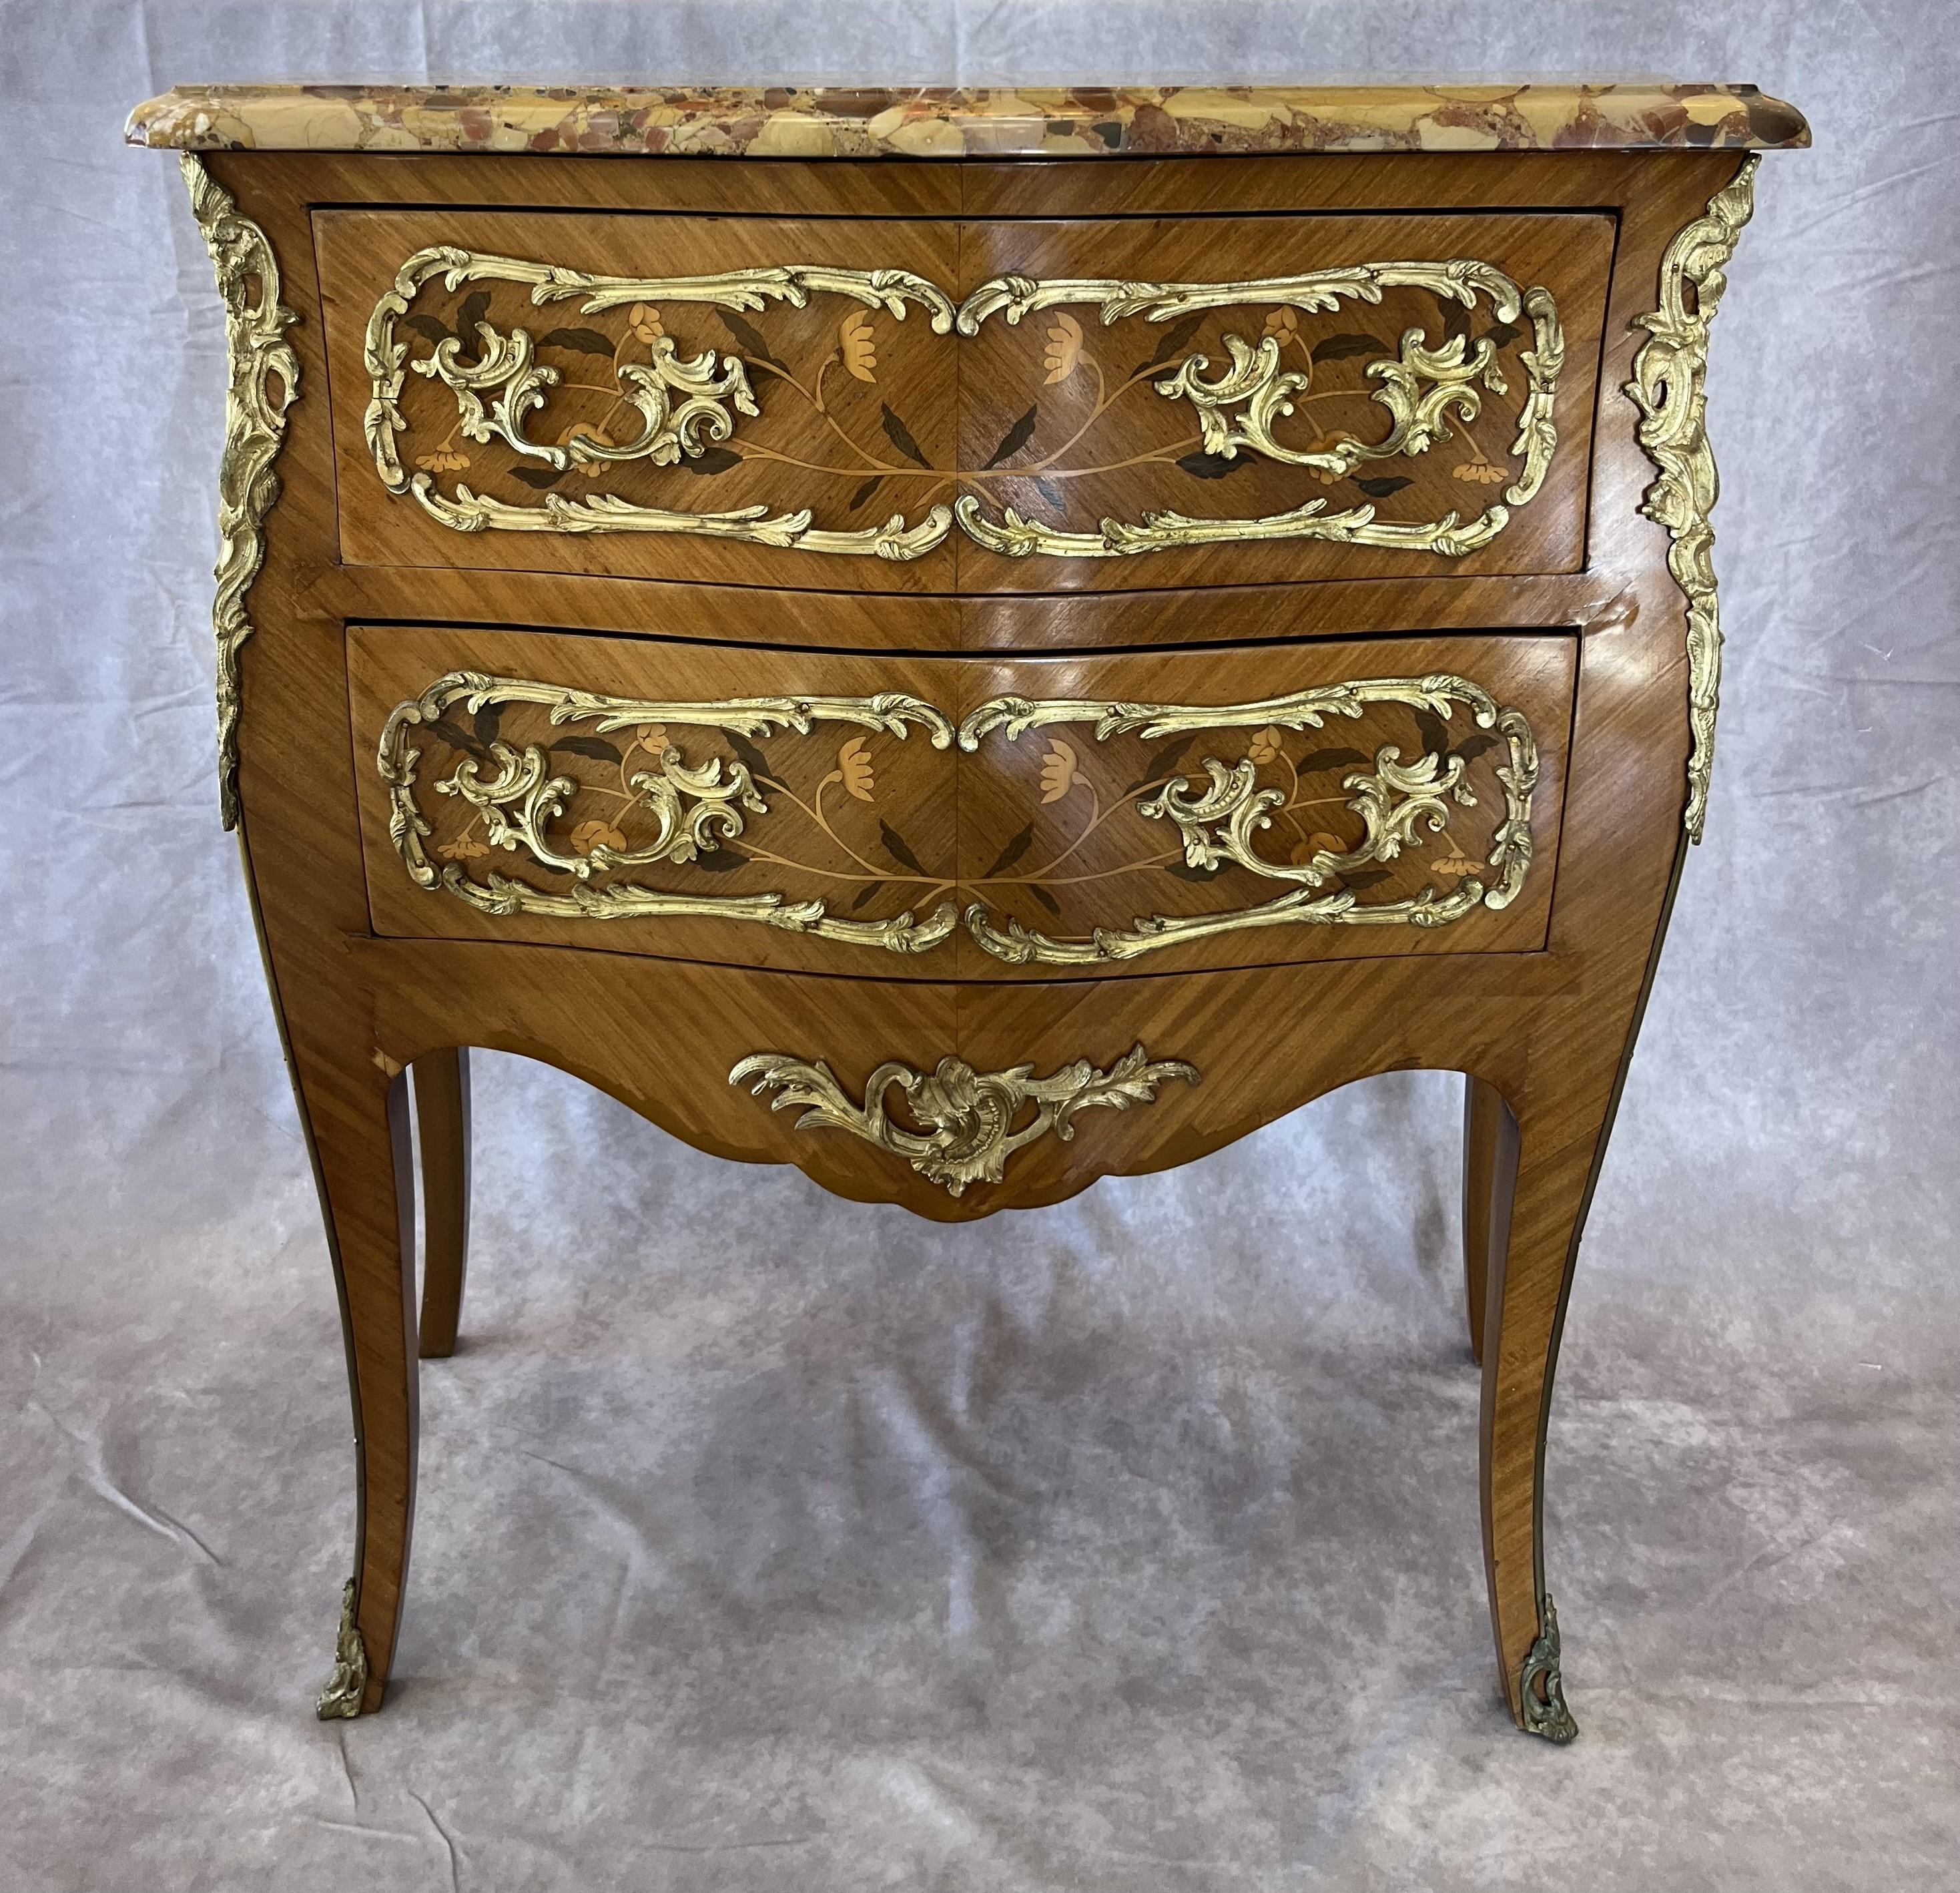 Louis XV style commode with drawers stamped Sormani on the wood, floral marquetery and gilt bronze mounted with the original mottled marble.